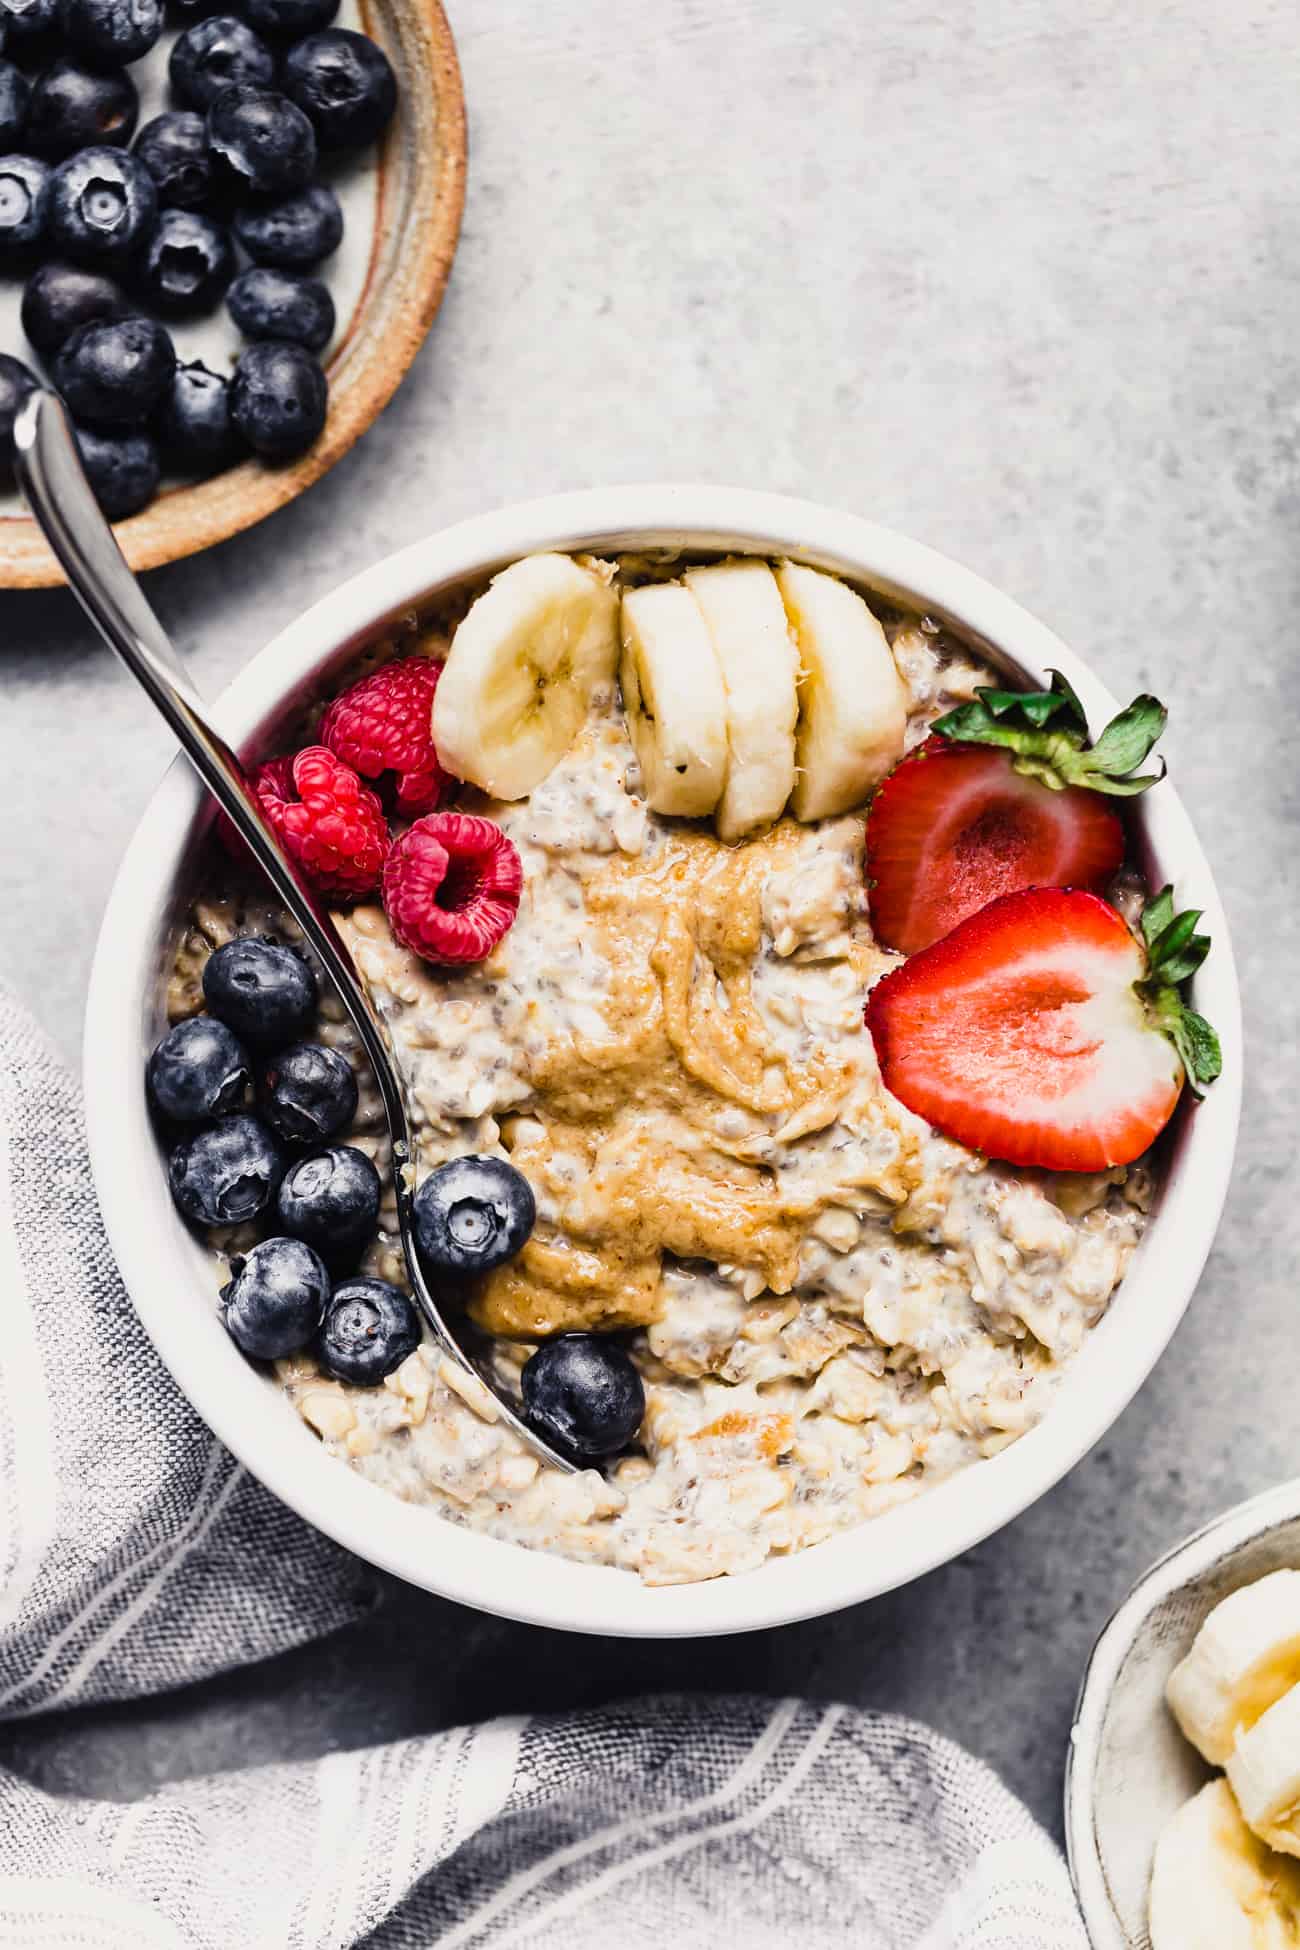 overnight oats in a bowl with peanut butter, berries and bananas